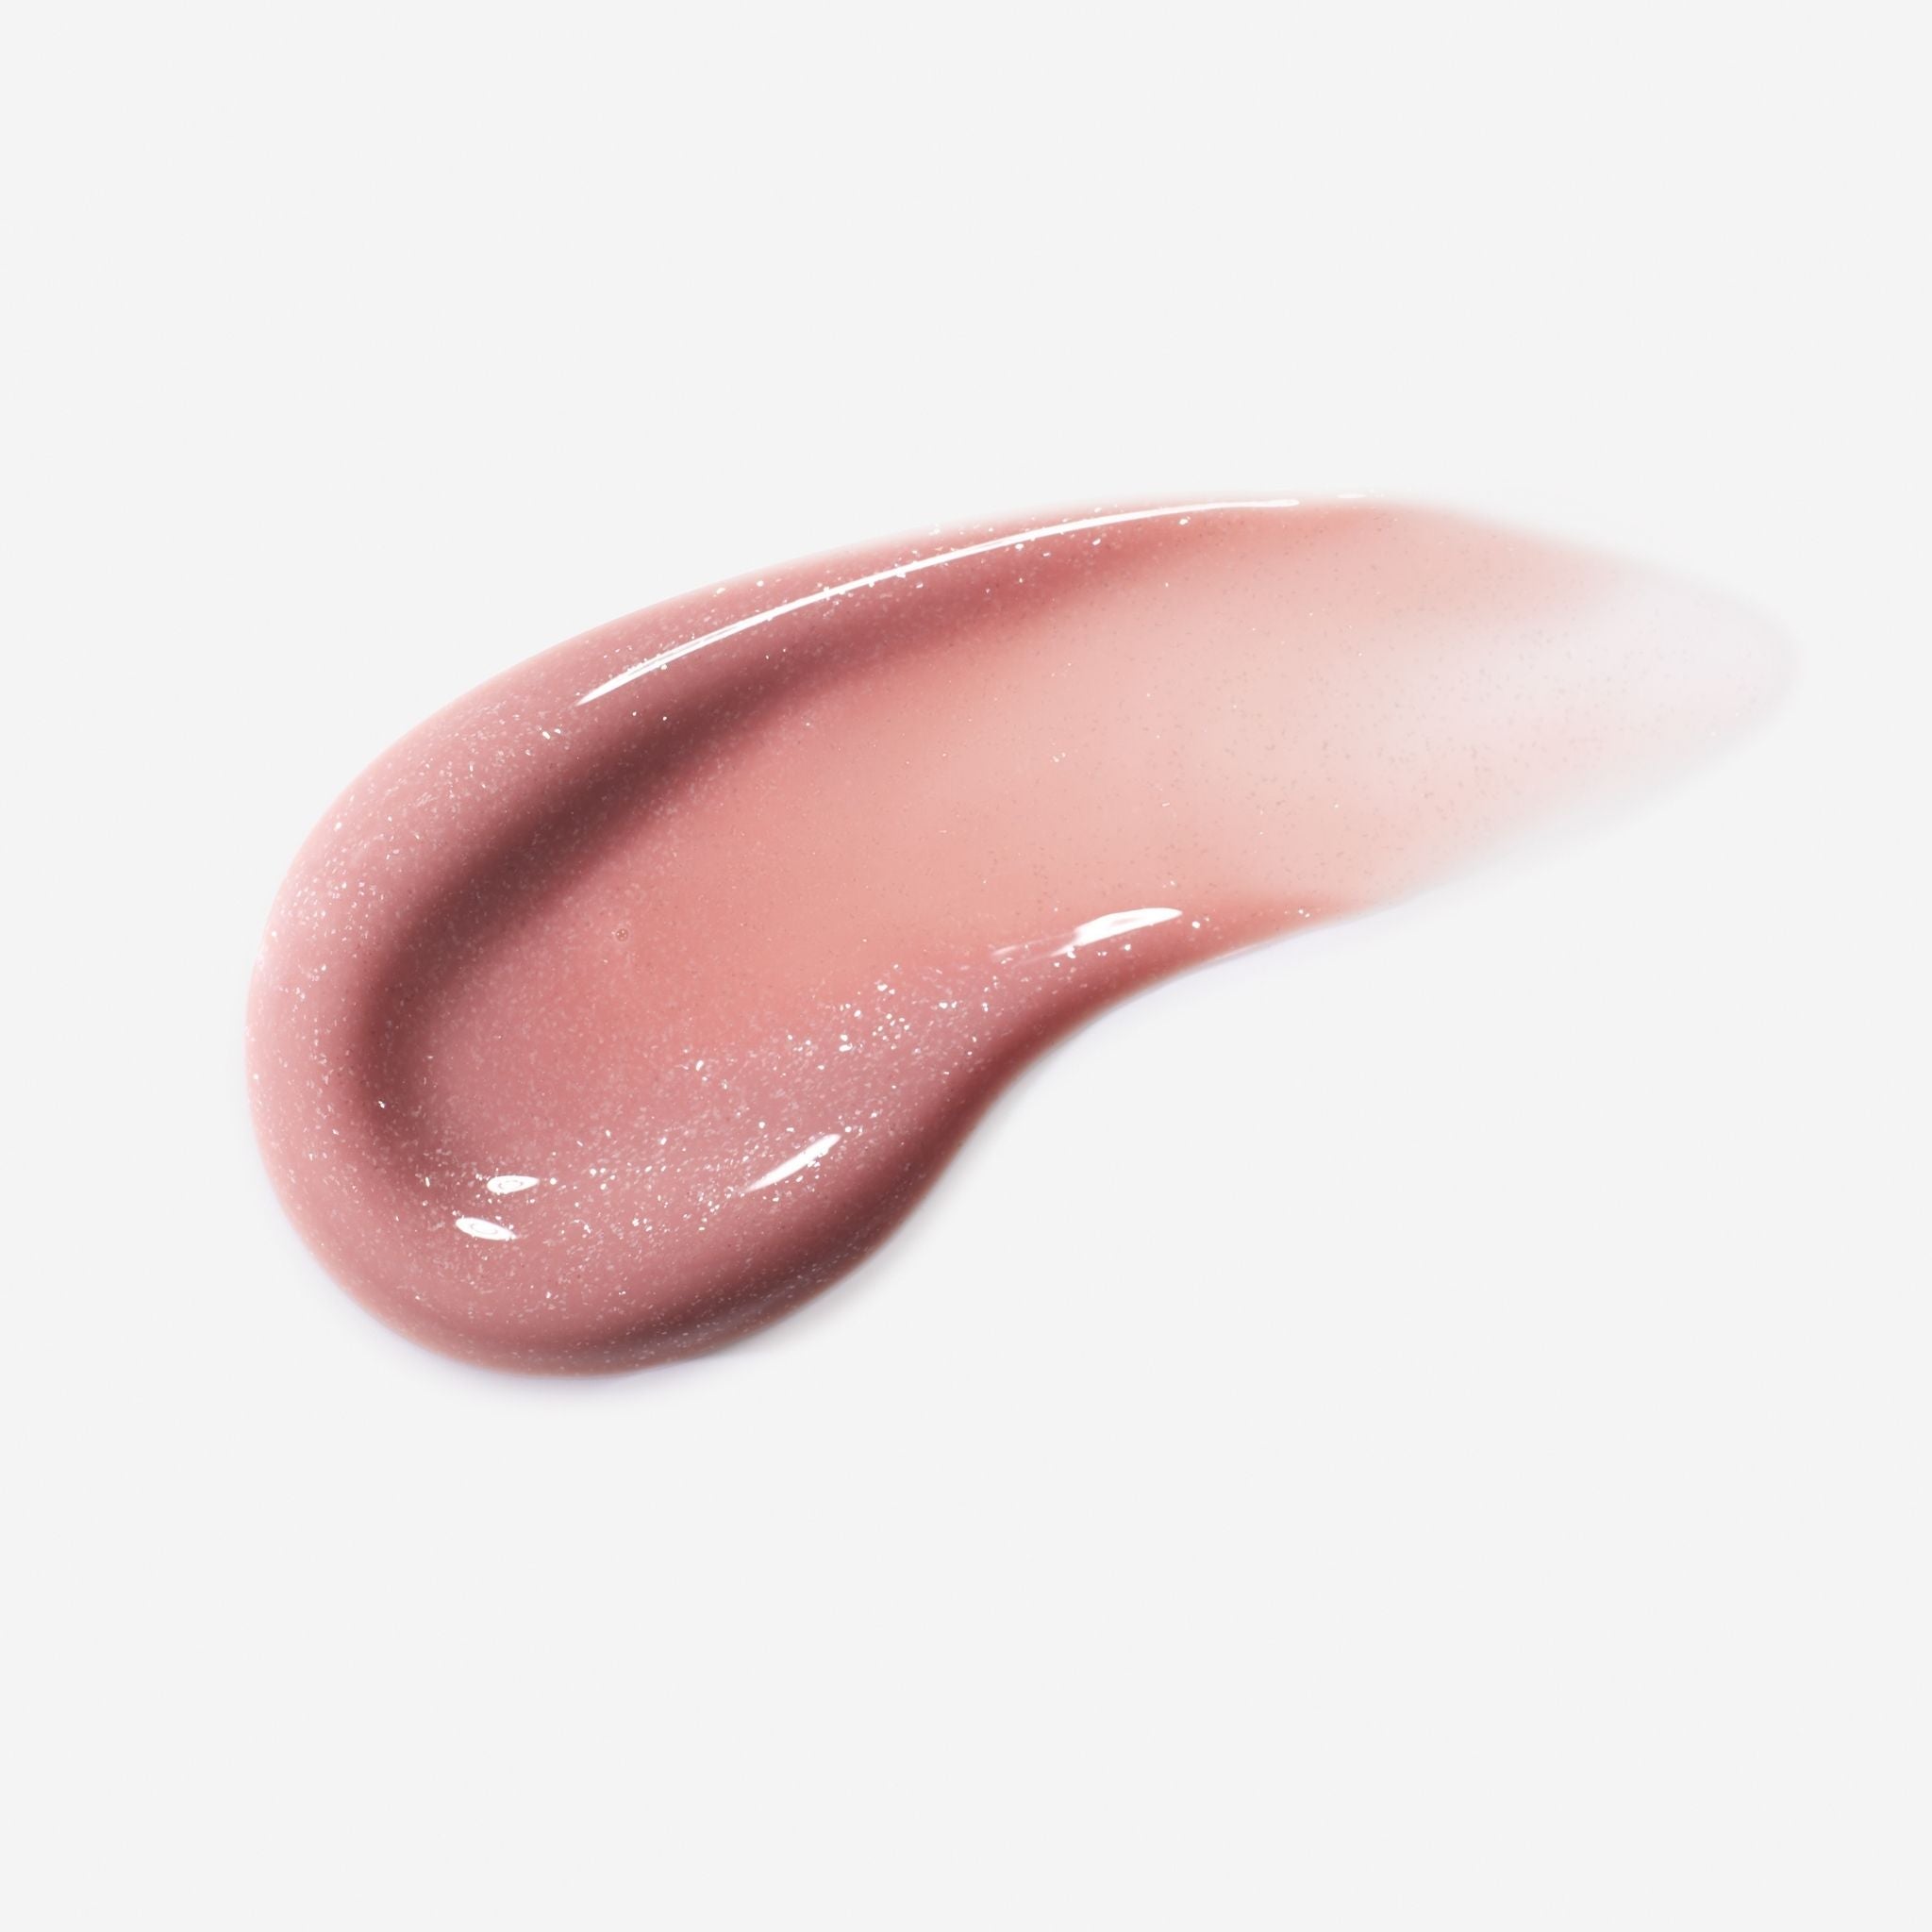 Perfect glob of Veil lip gloss, previously known as beige frosted. The ideal nude pink with glitter sparkle